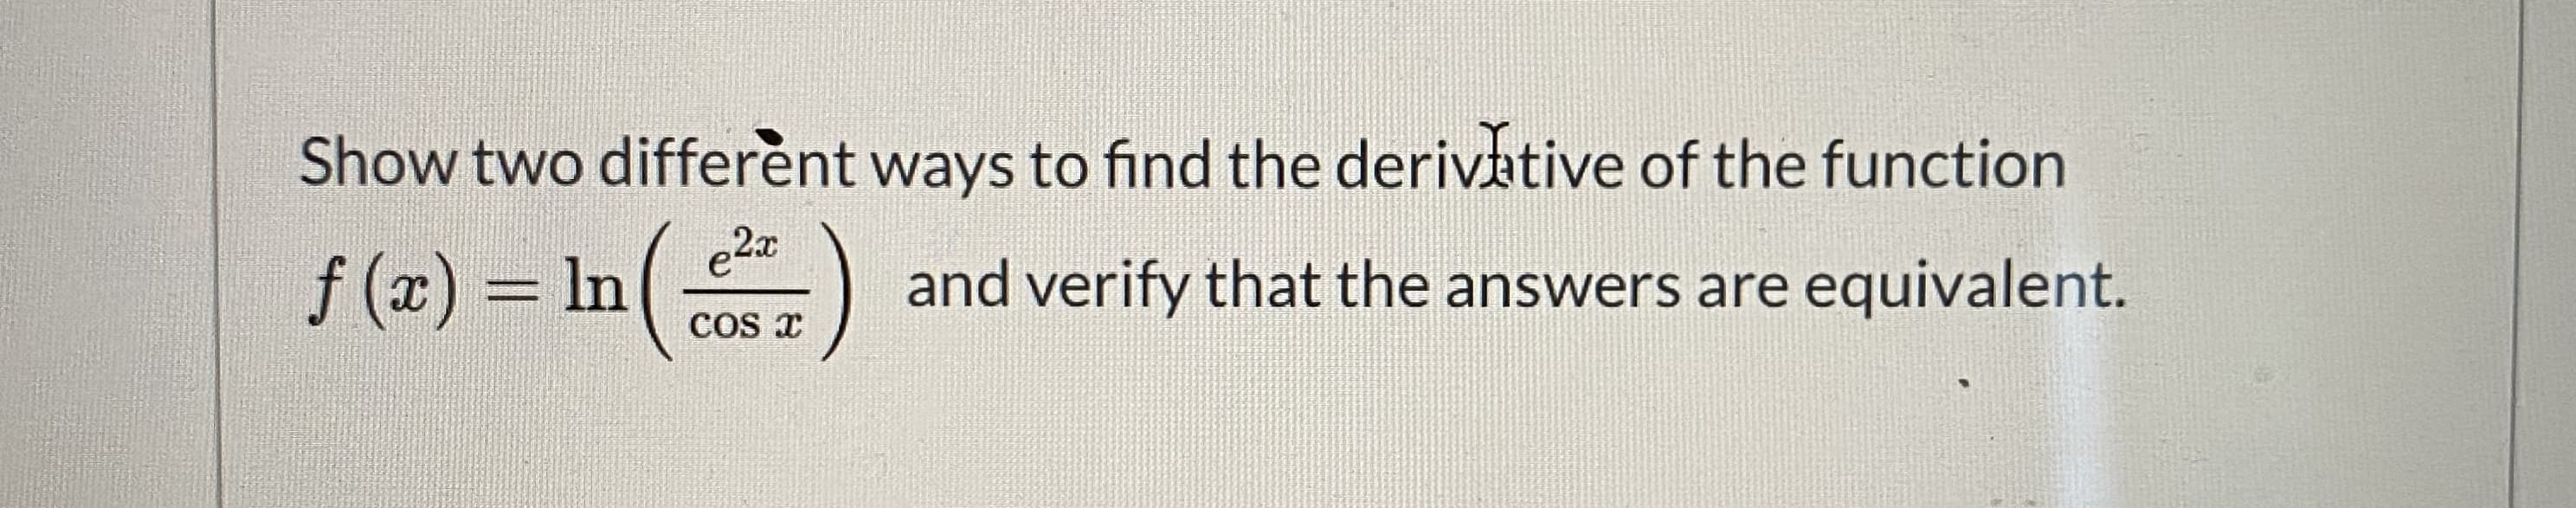 Show two differènt ways to find the derivative of the function
f (x) = In(
and verify that the answers are equivalent.
COS T
